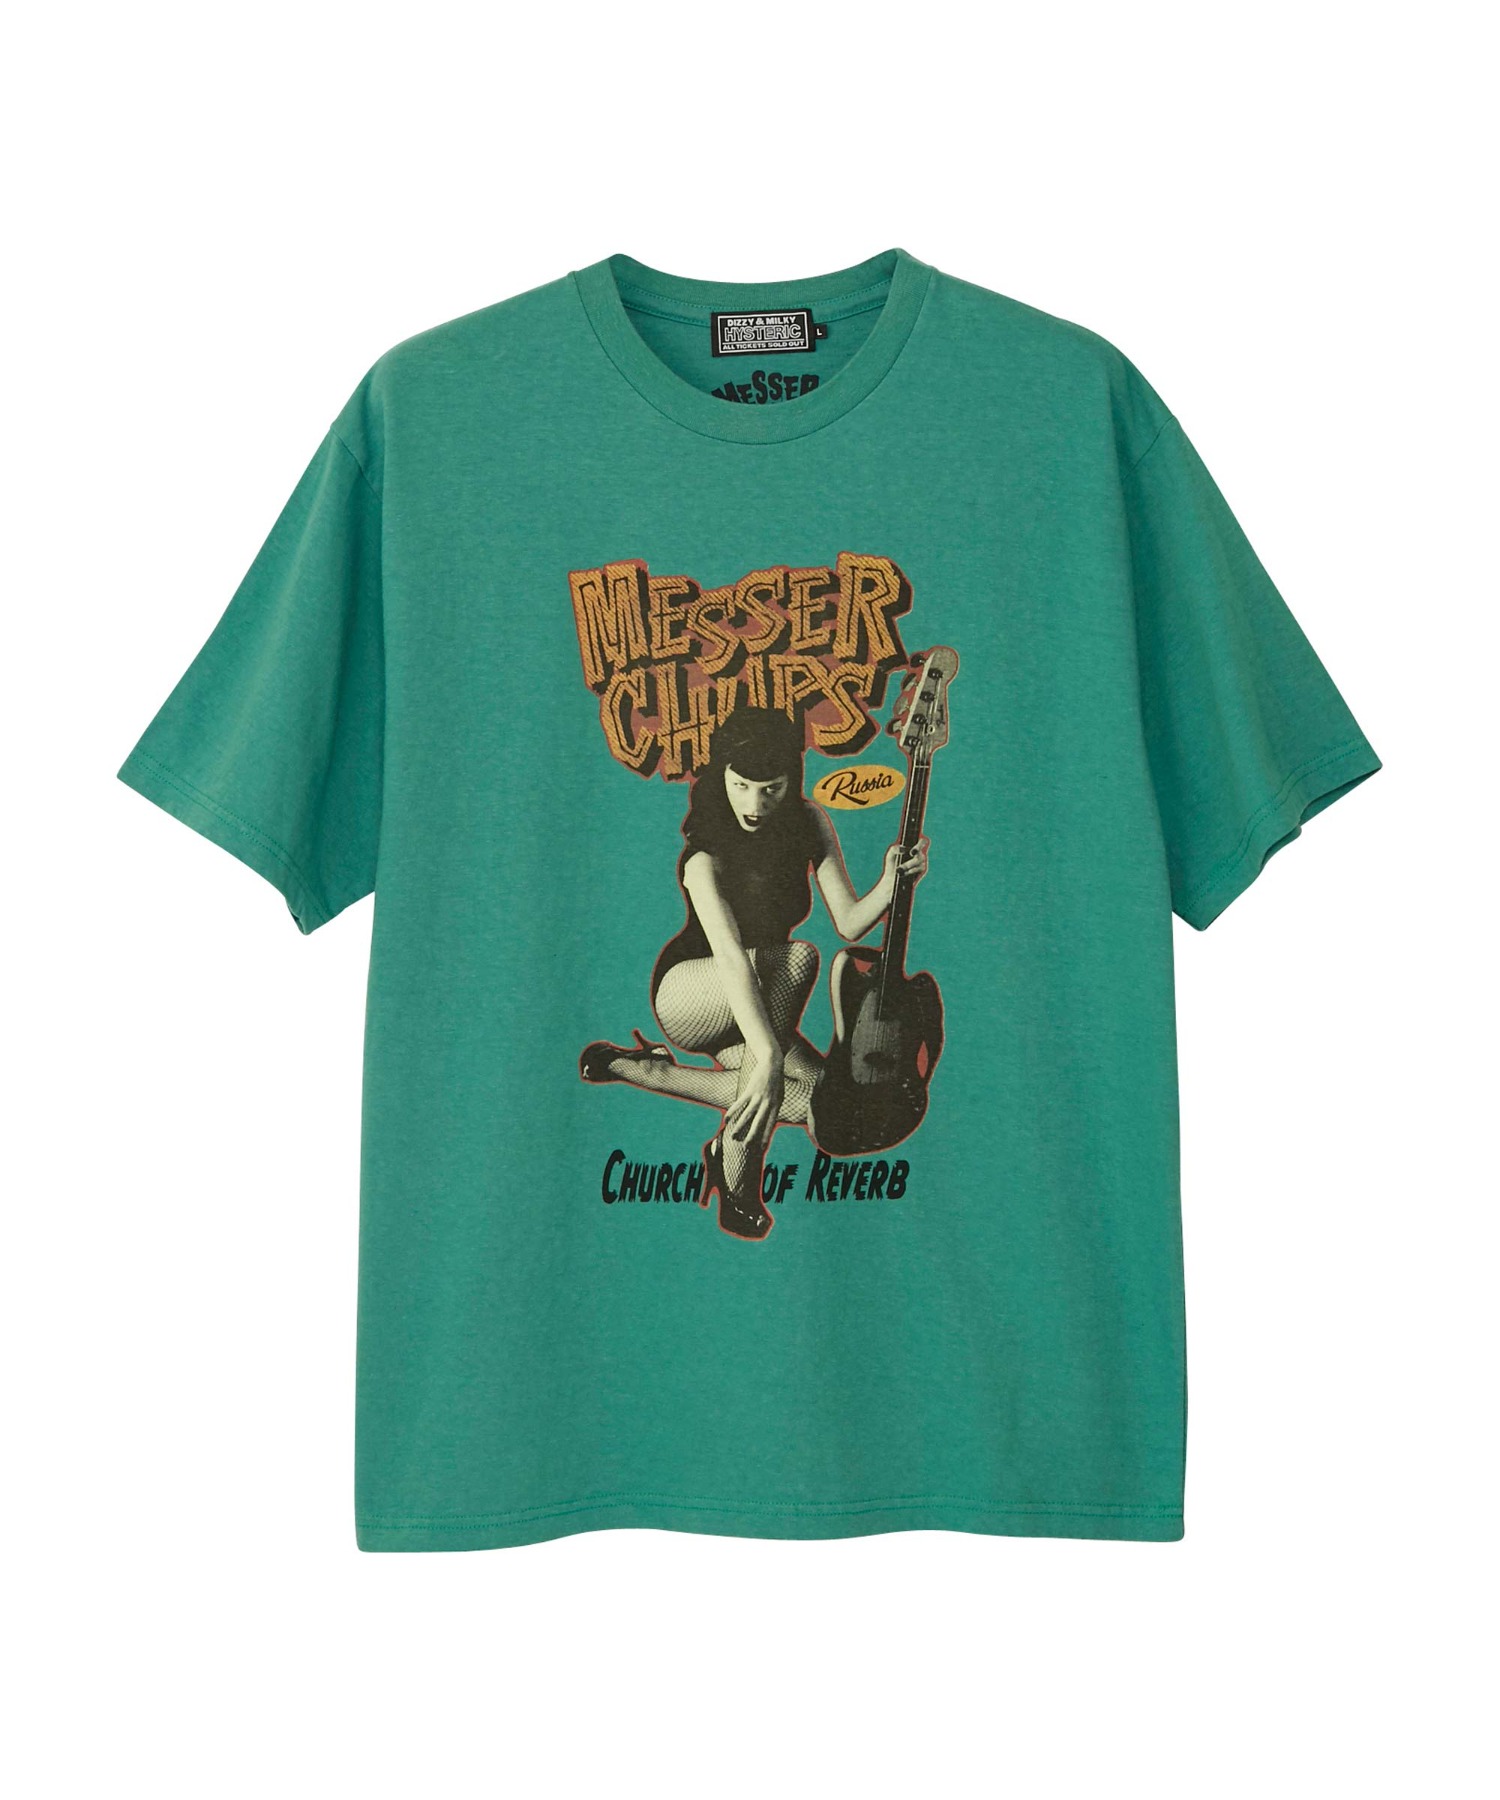 MESSER CHUPS/MC FROM RUSSIA Tシャツ